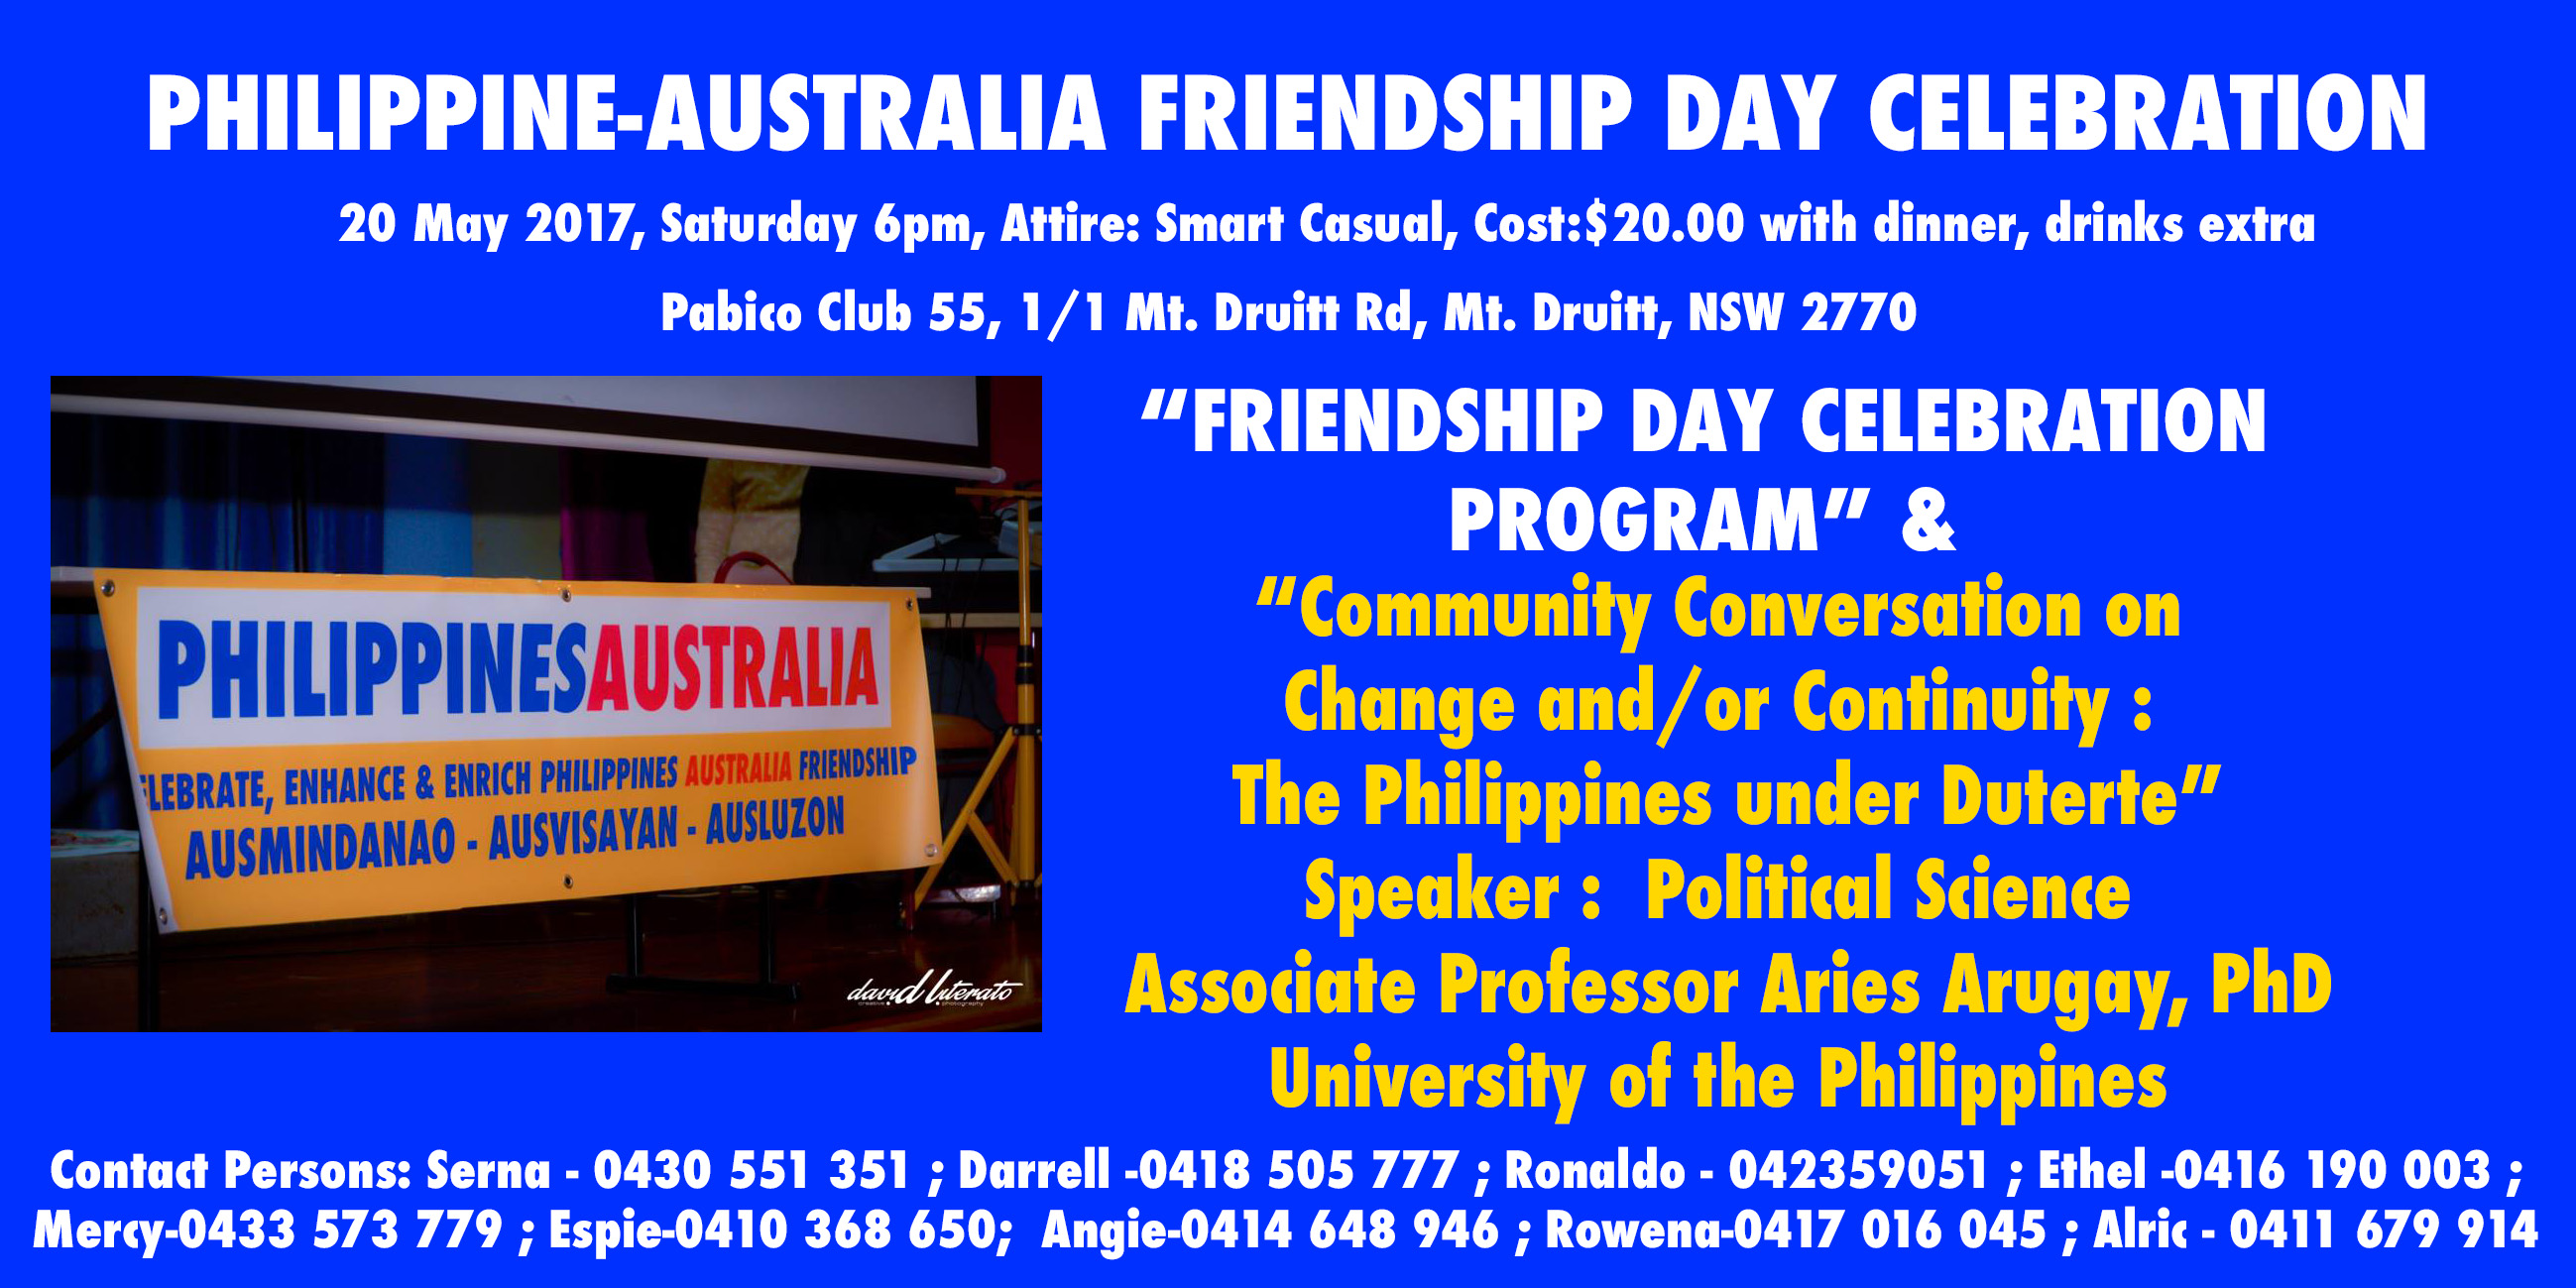 Philippines Australia Friendship Day 2017 on May 20.